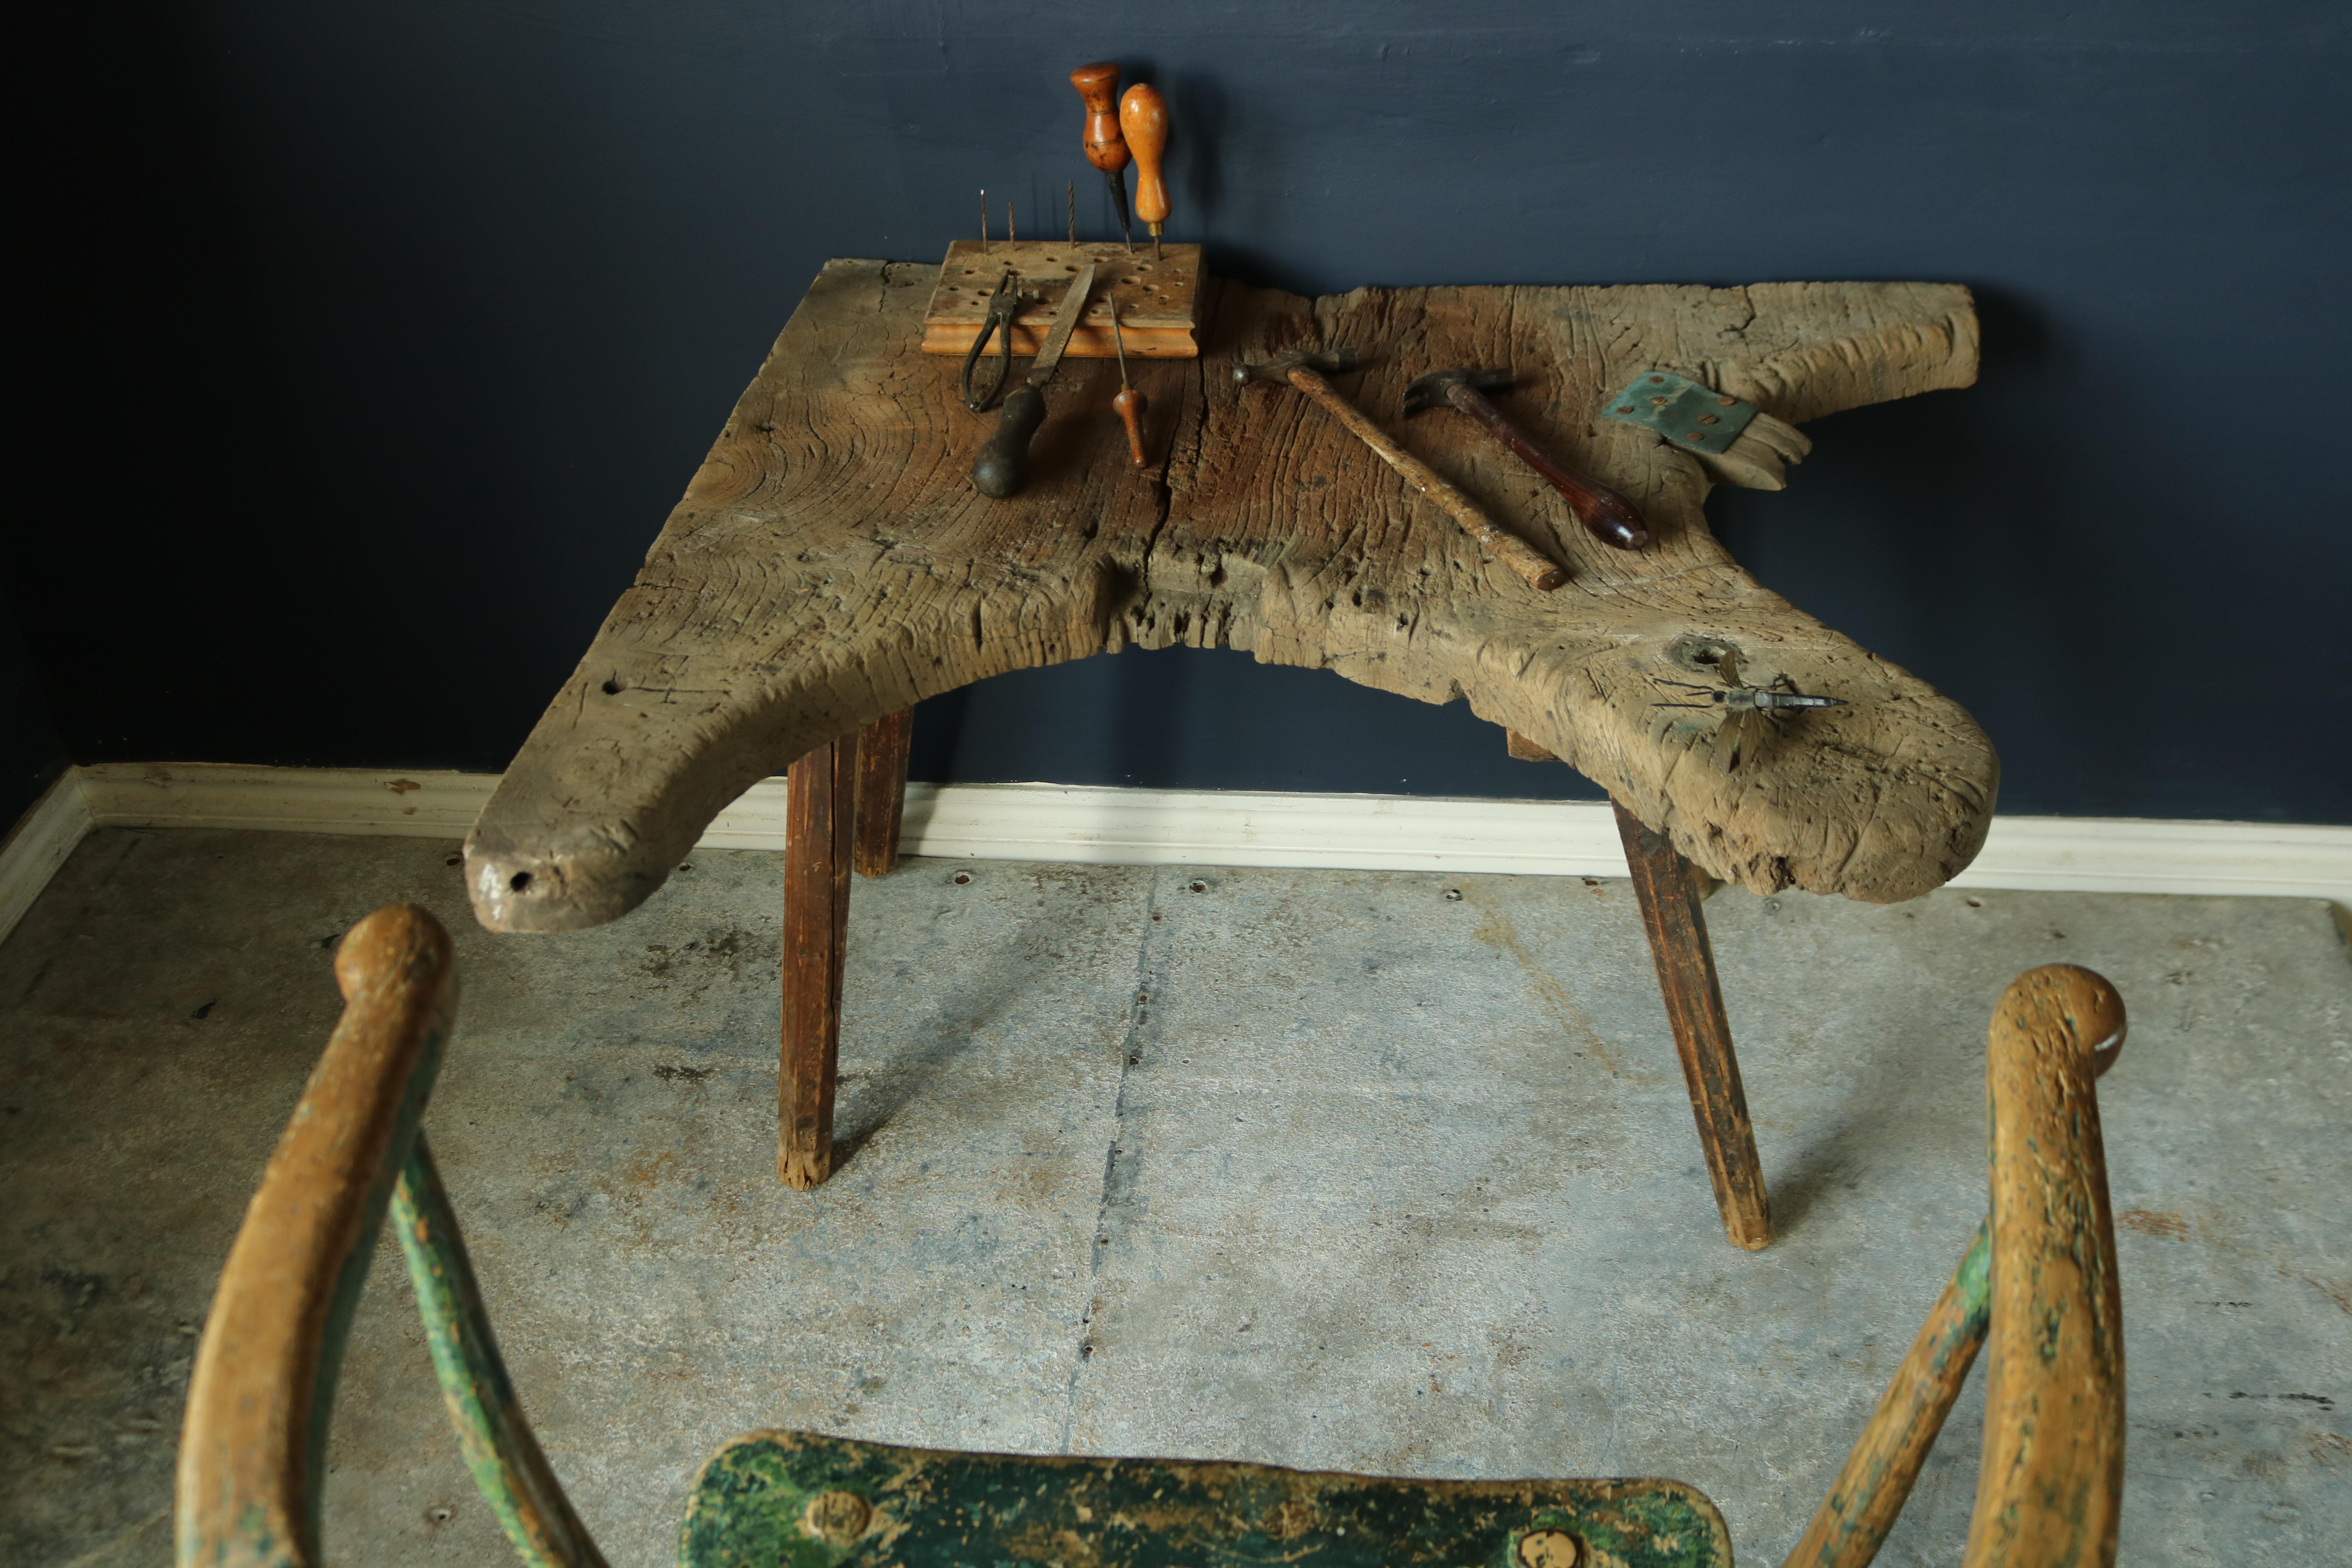 A wonderful Primitive early 19th century jewelry makers work bench, fantastic wear and patina, stand on four Primitive stick legs.